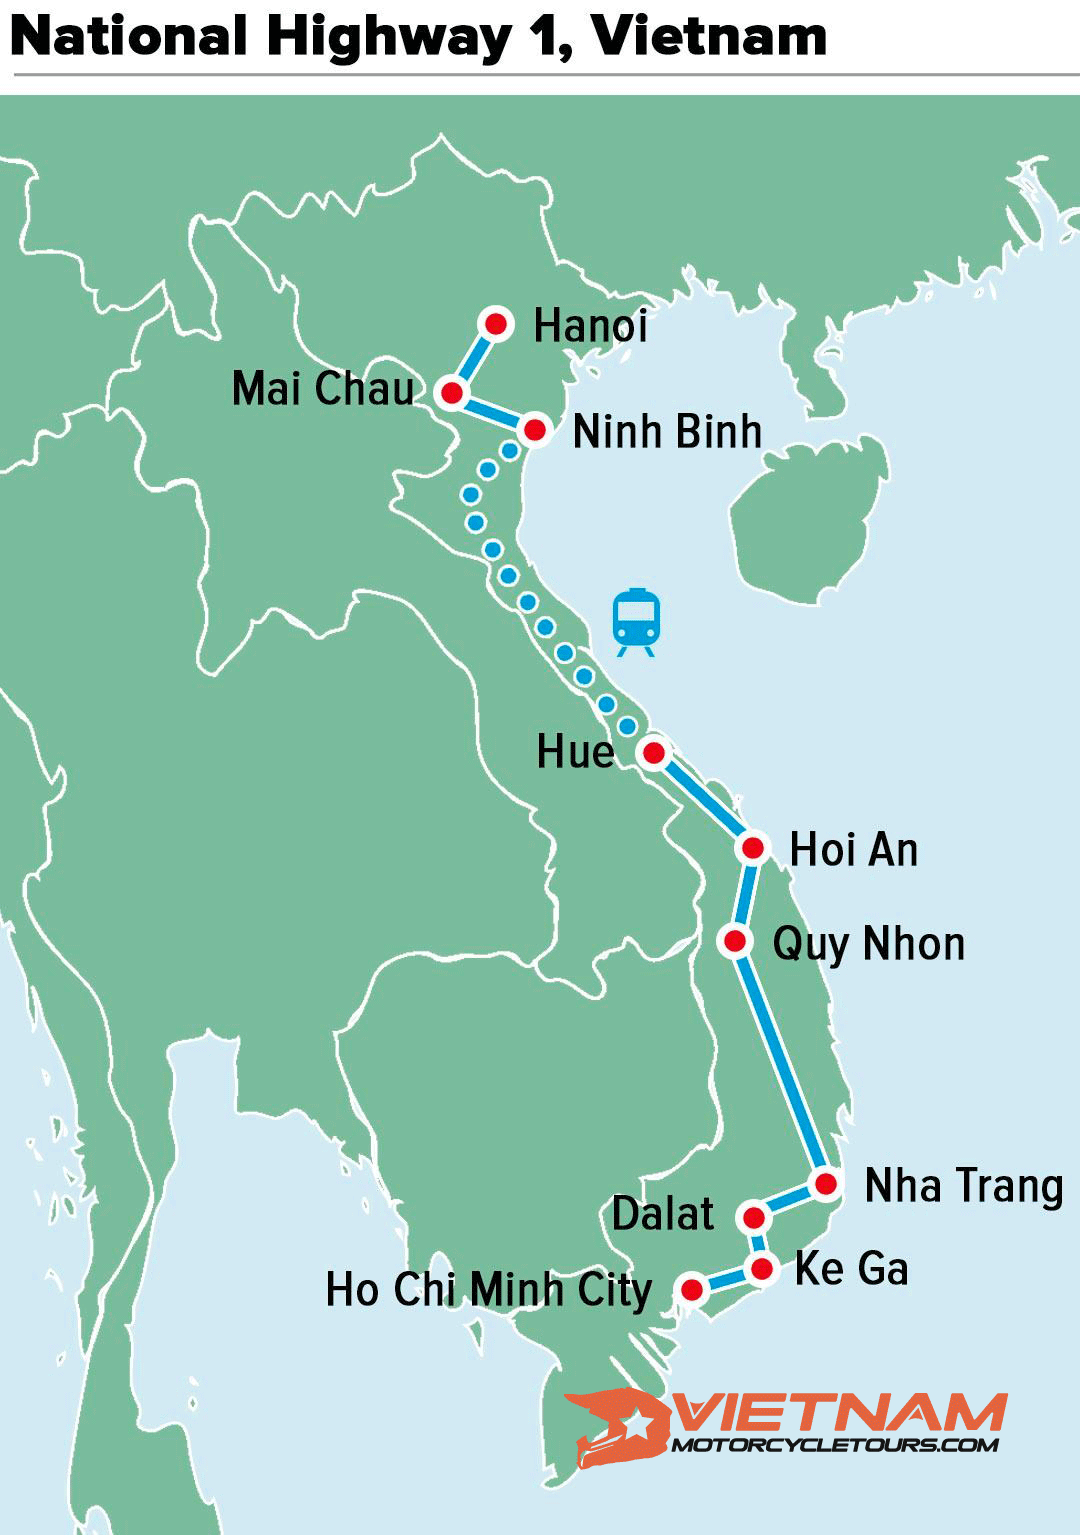 The East Ho Chi Minh Trail Road map.